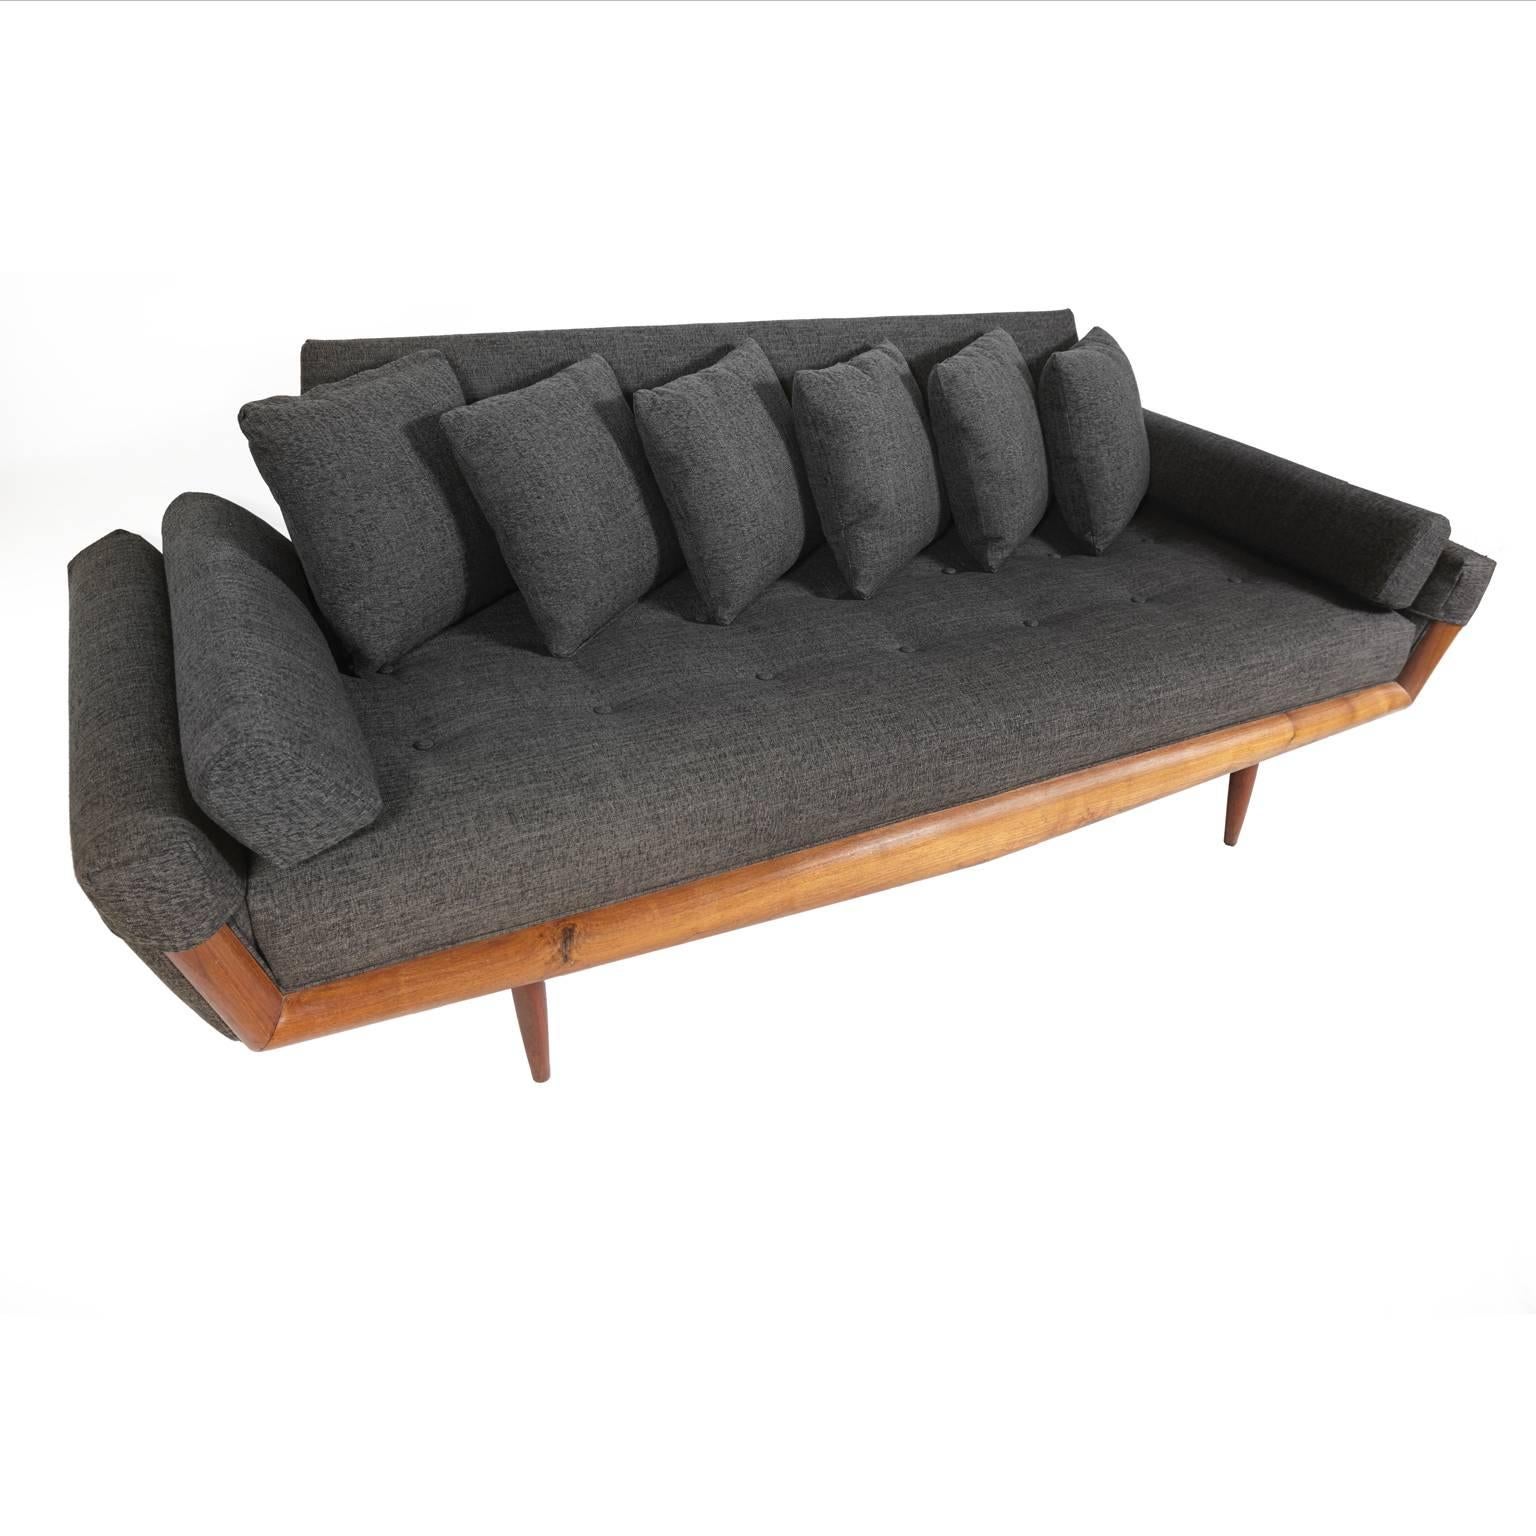 Adrian Pearsall Mid-Century Modern sofa with walnut frame and newly upholstered in charcoal grey fabric. 
Sofa has six pillows but can be used with fewer pillows or plain.
    